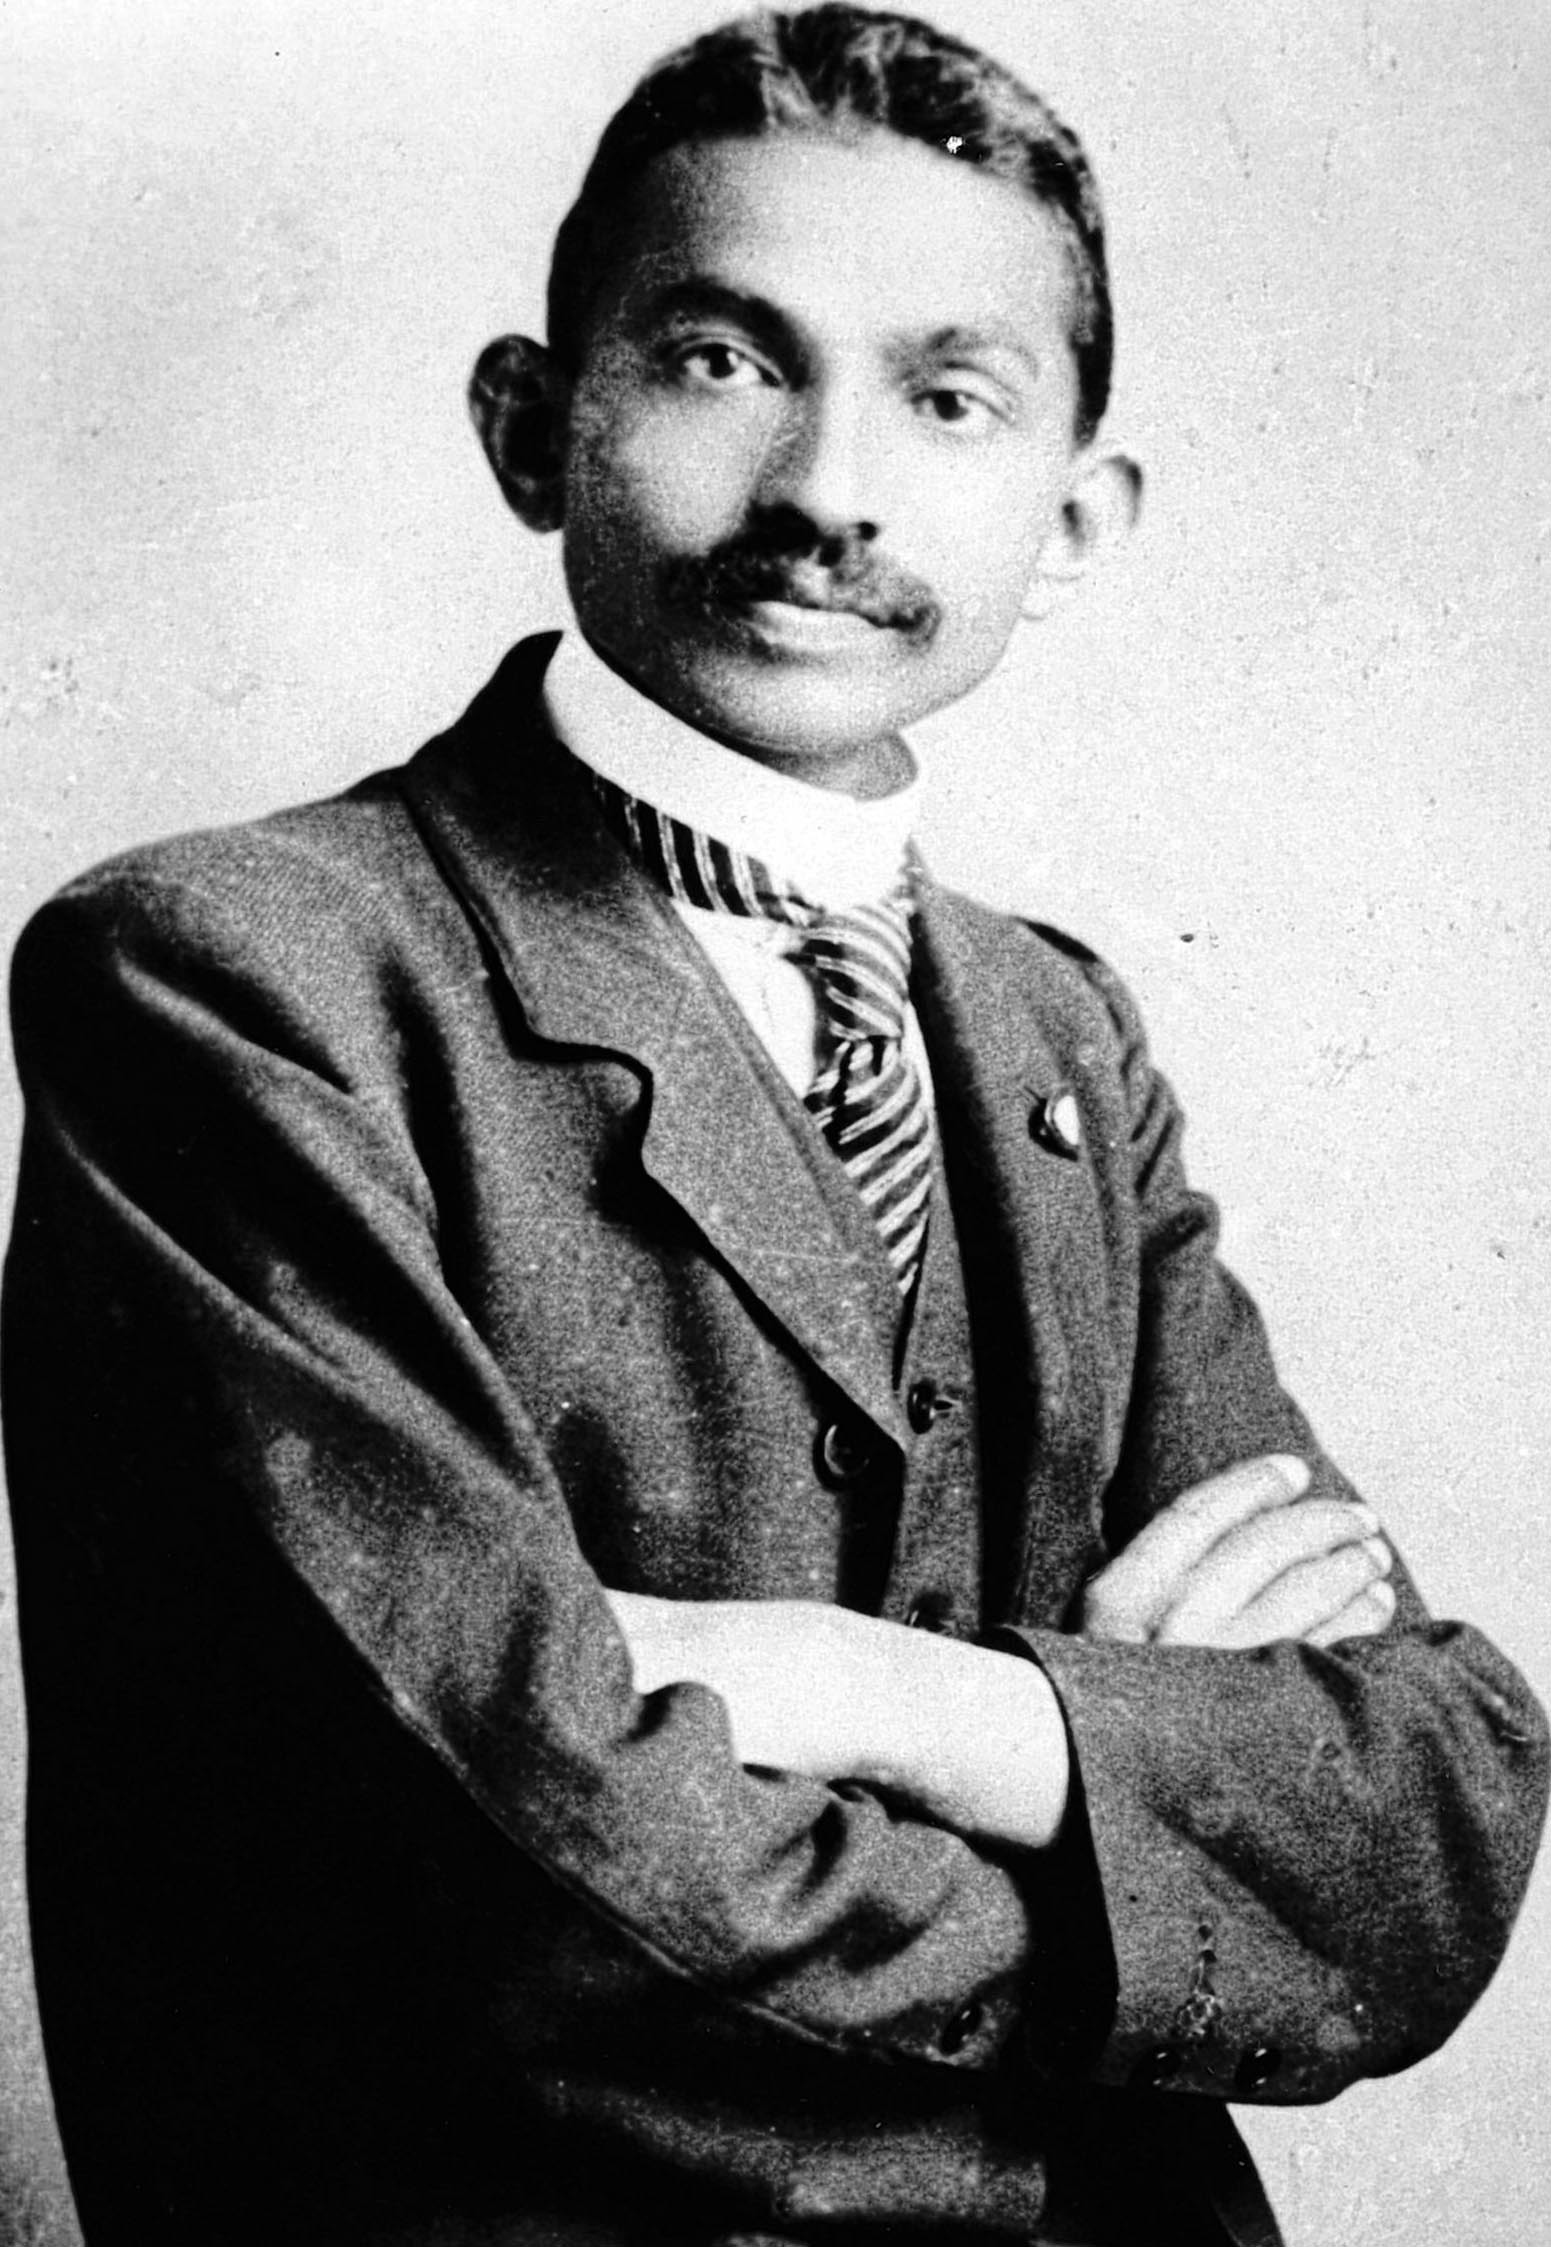 Gandhi in his younger days.